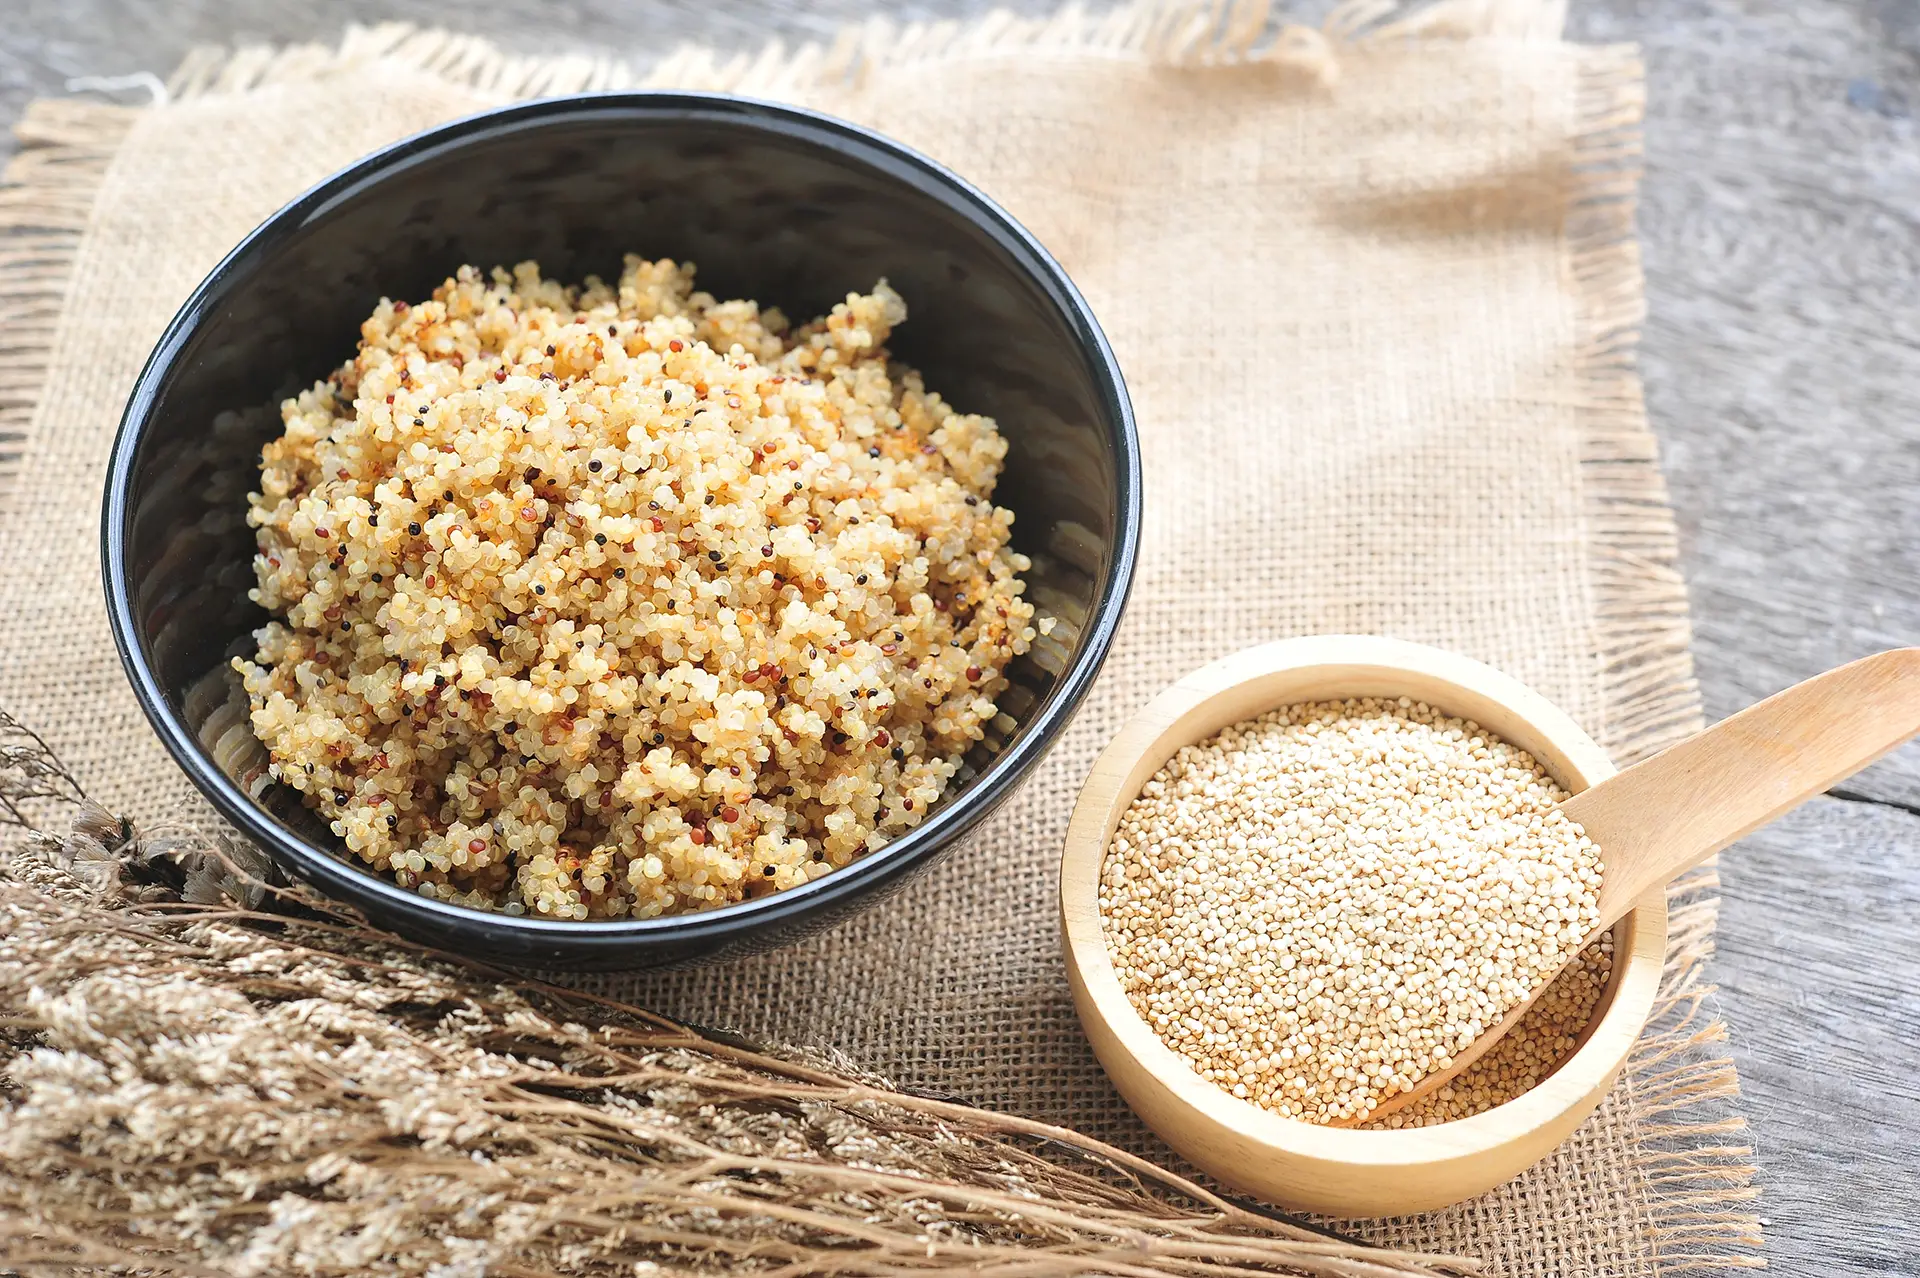 Is Quinoa Good For Dogs?